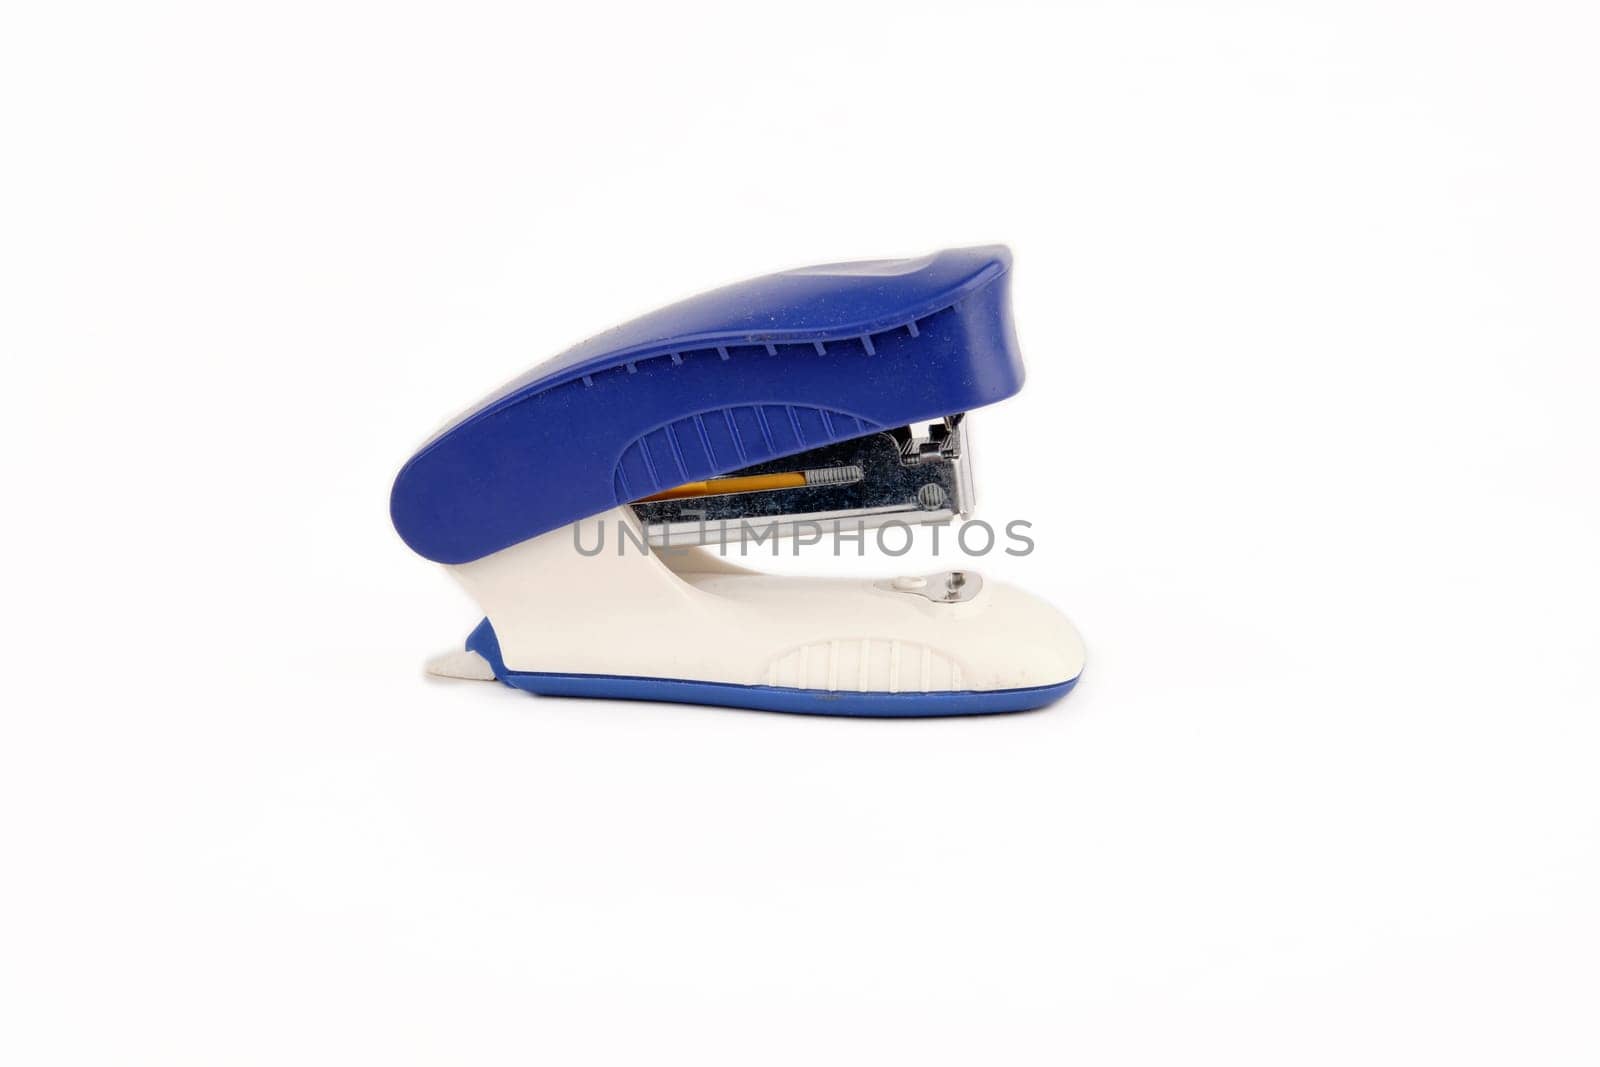 Blue stapler isolated on a white background. Side view